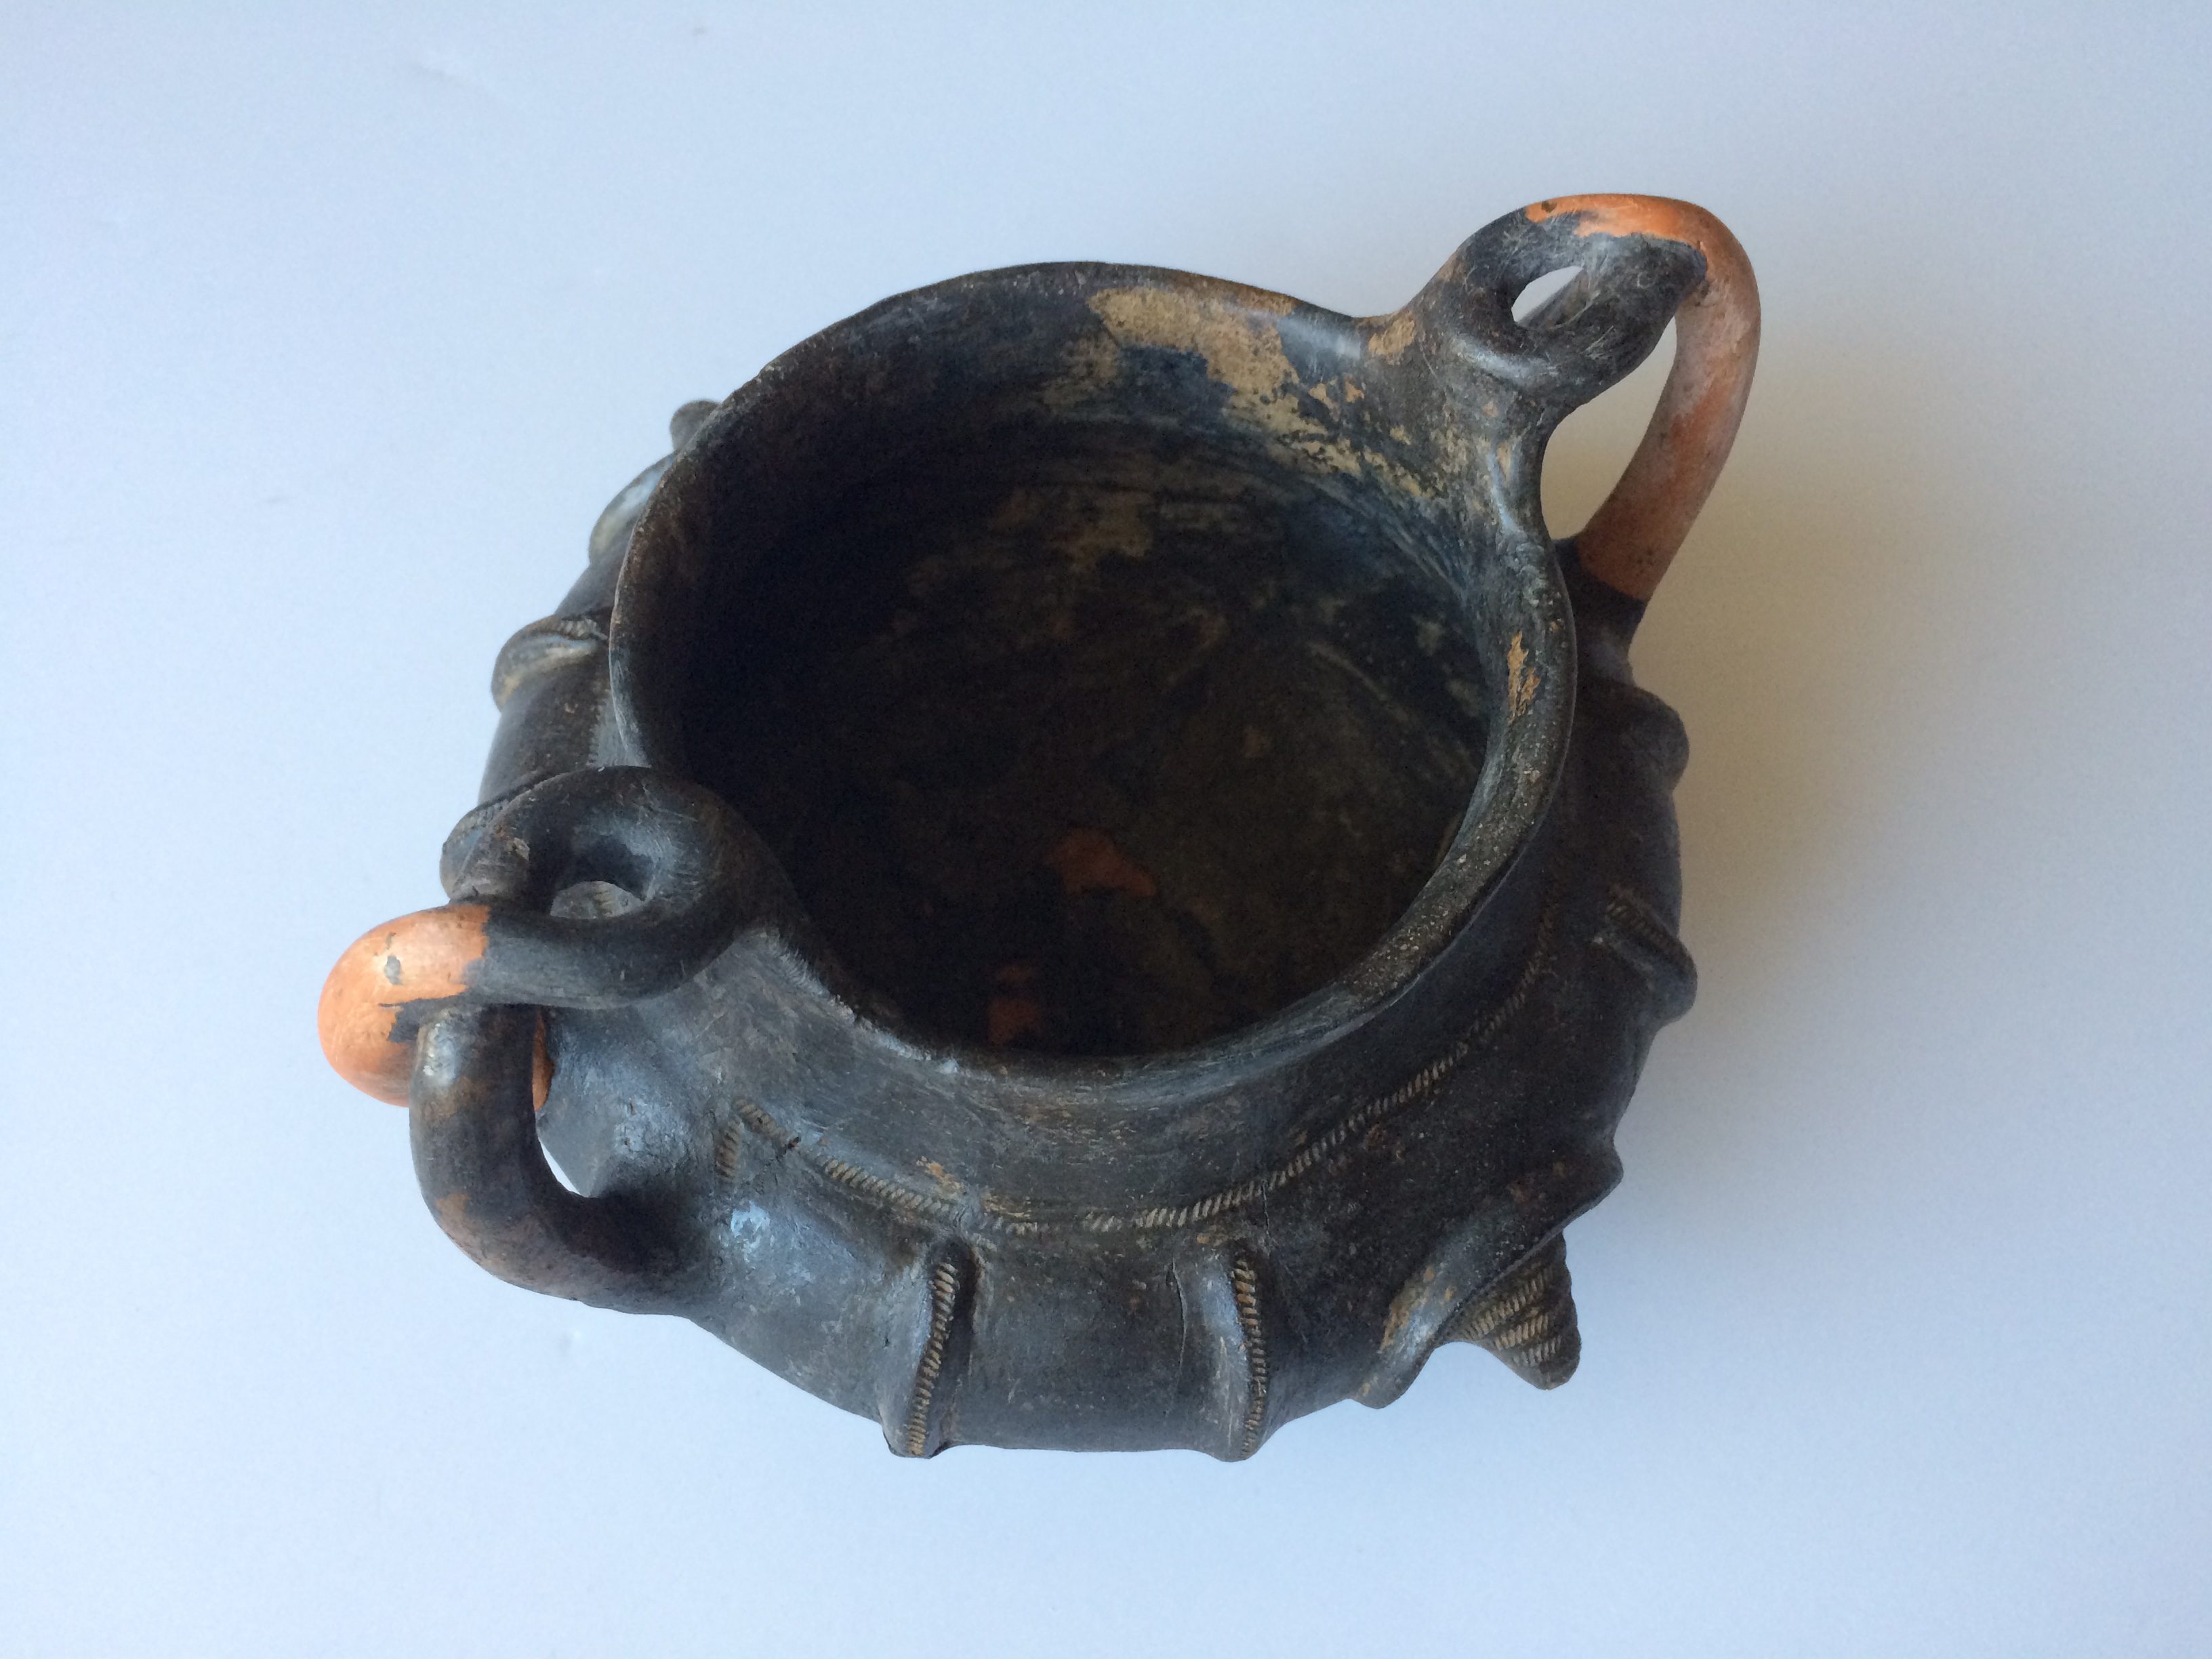 Etruscan pottery during conservation with new sculpted handles